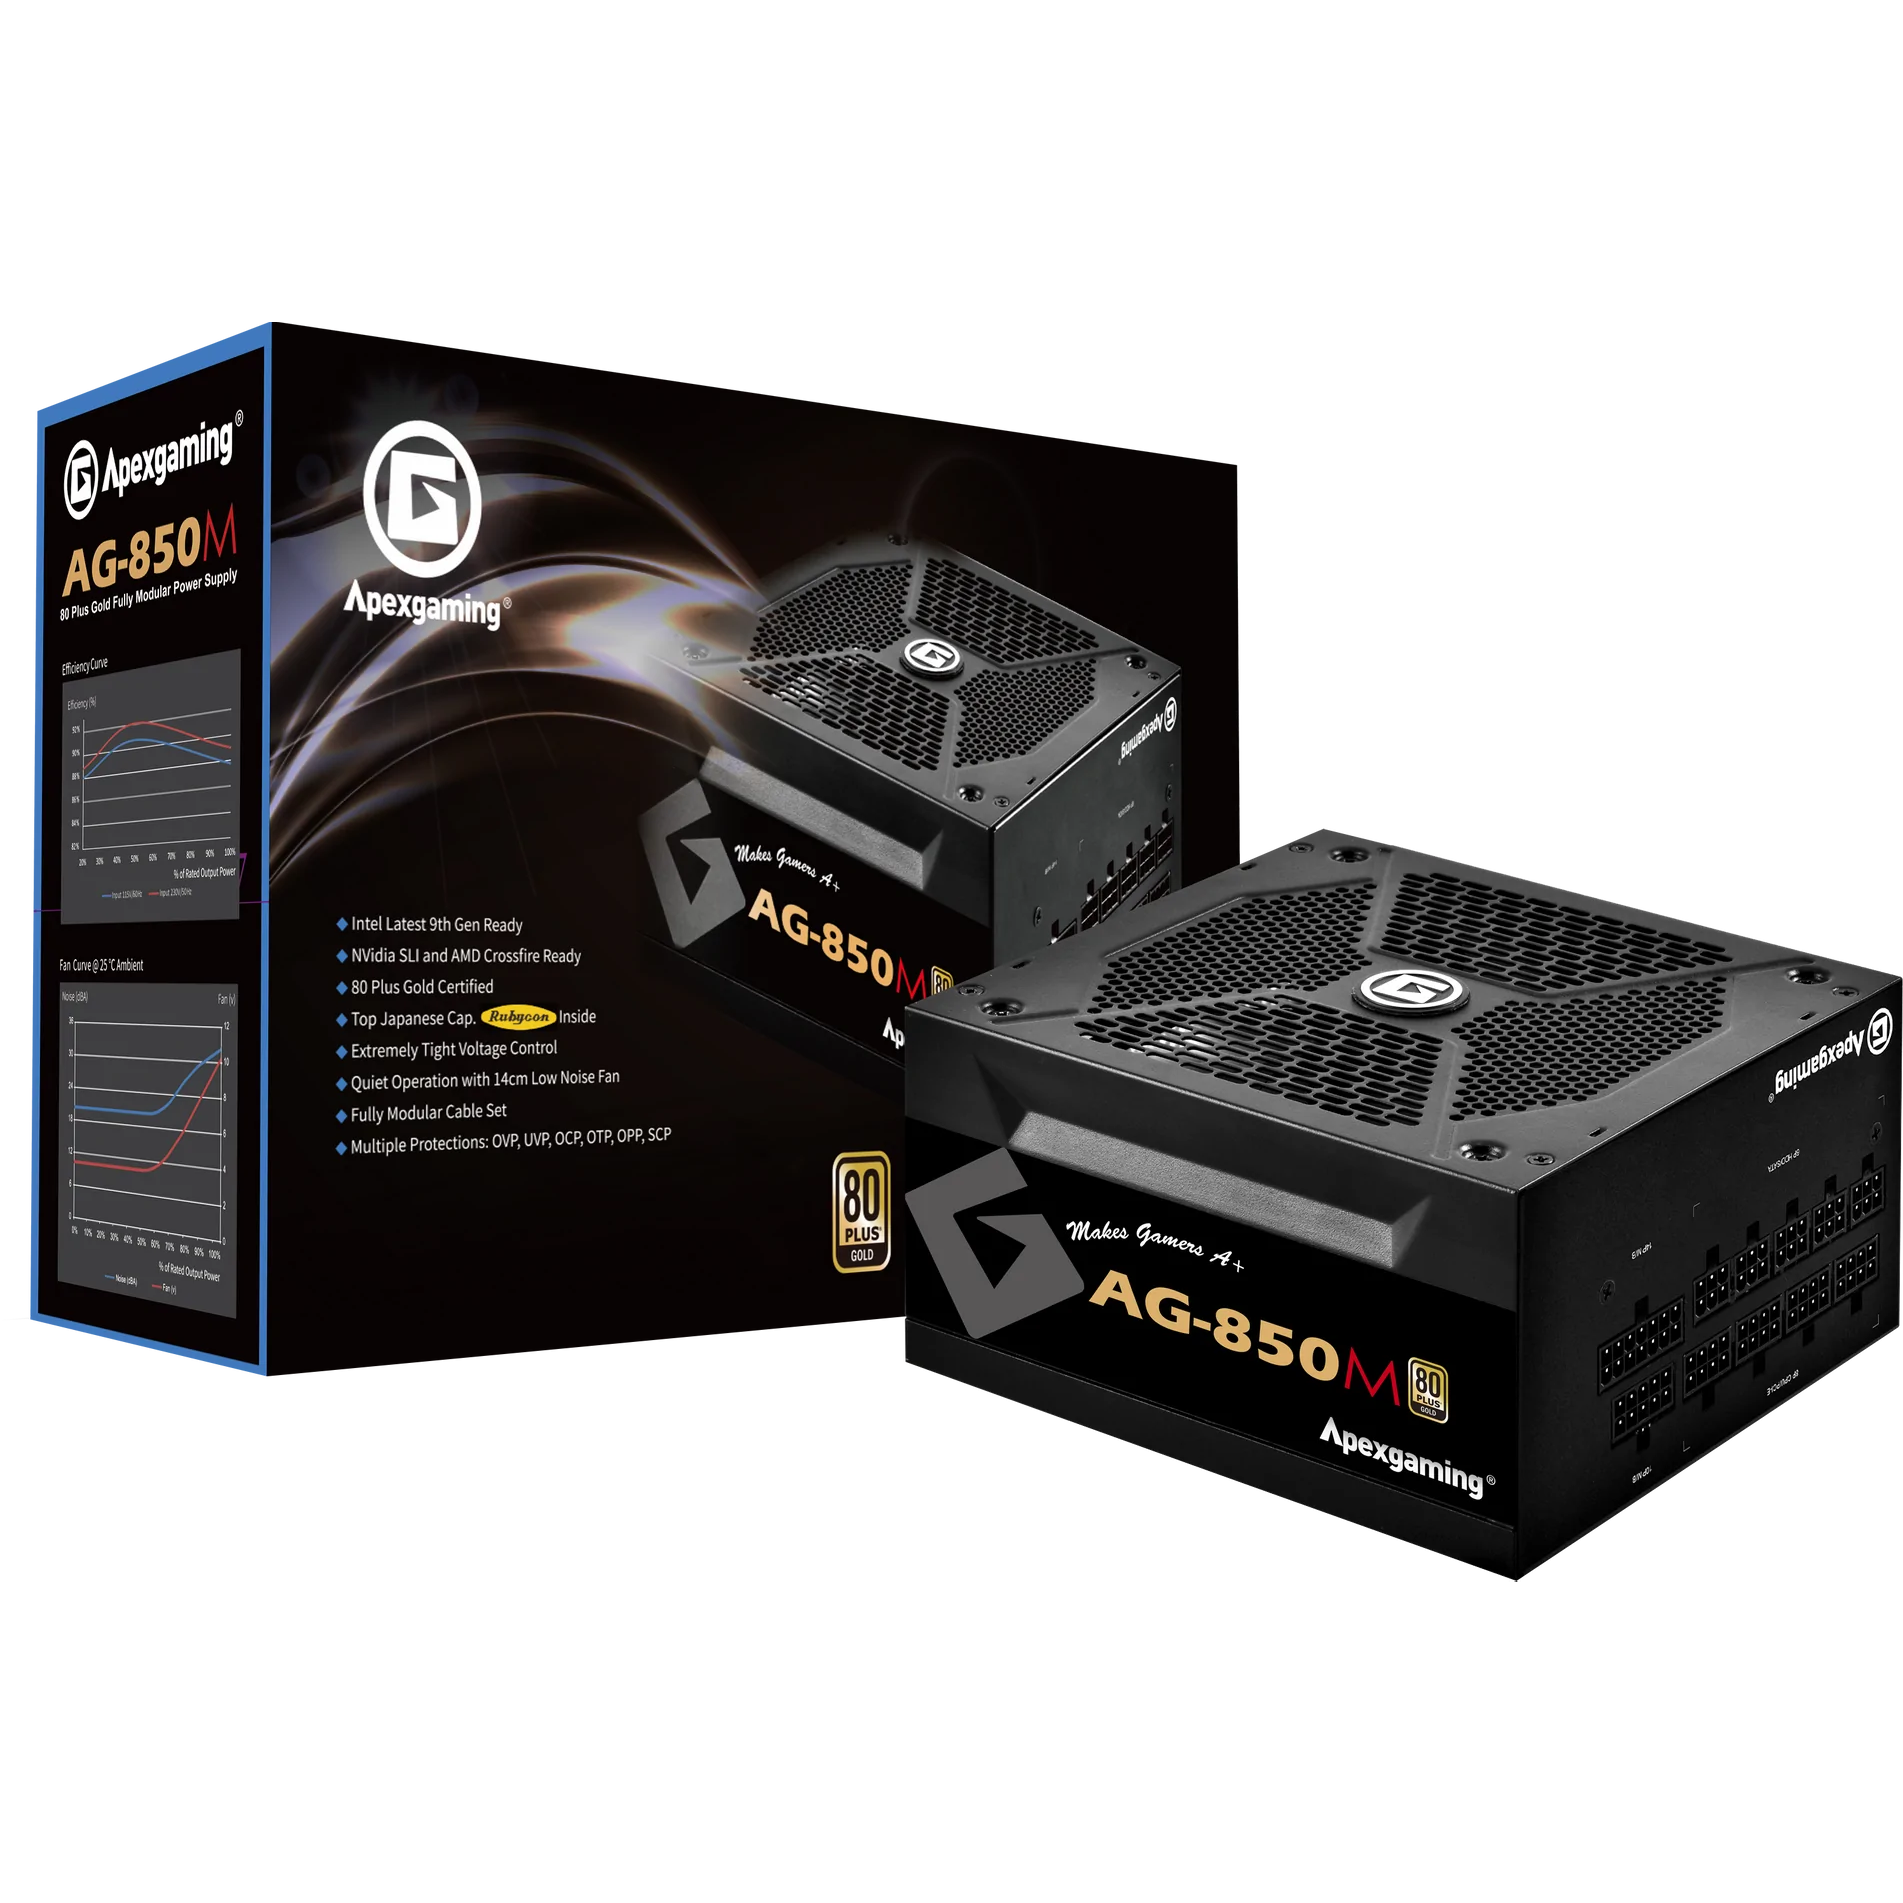 Xilence XP850MR9 850W Alimentation PC, semi modulaire, 80+ Gold, Gaming,  ATX - SECOMP AG